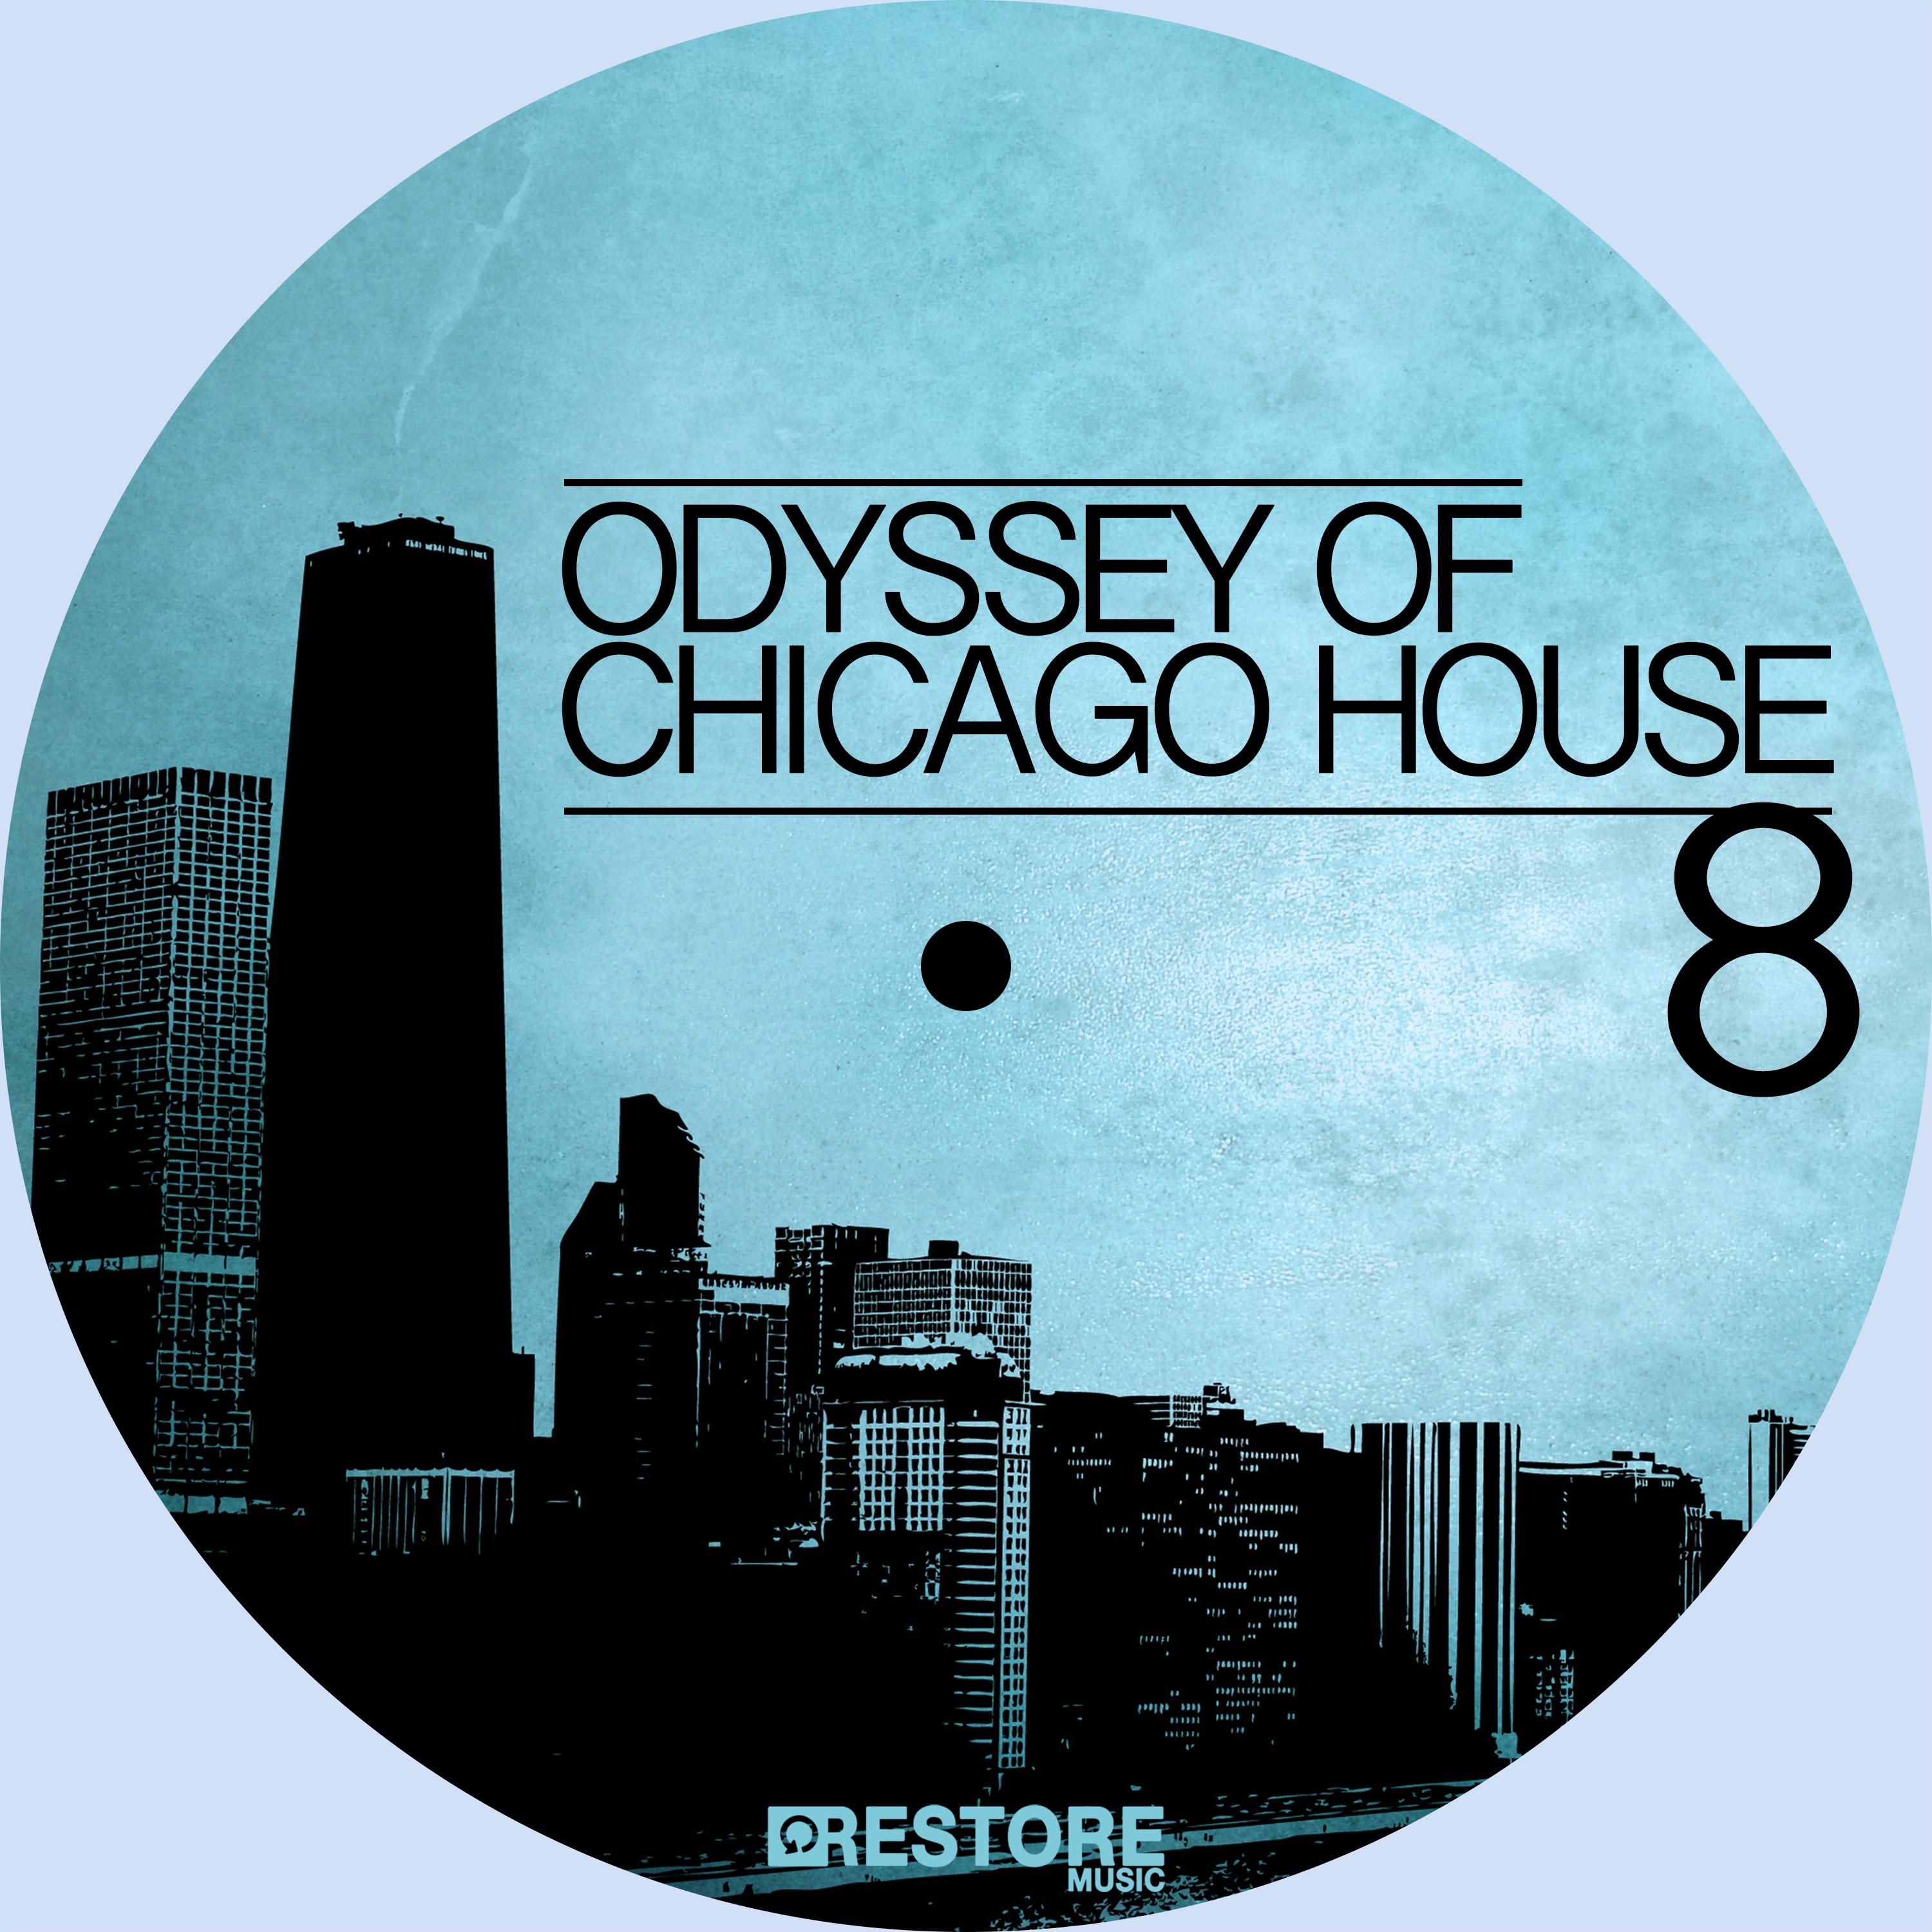 Odyssey of Chicago House, Vol. 8